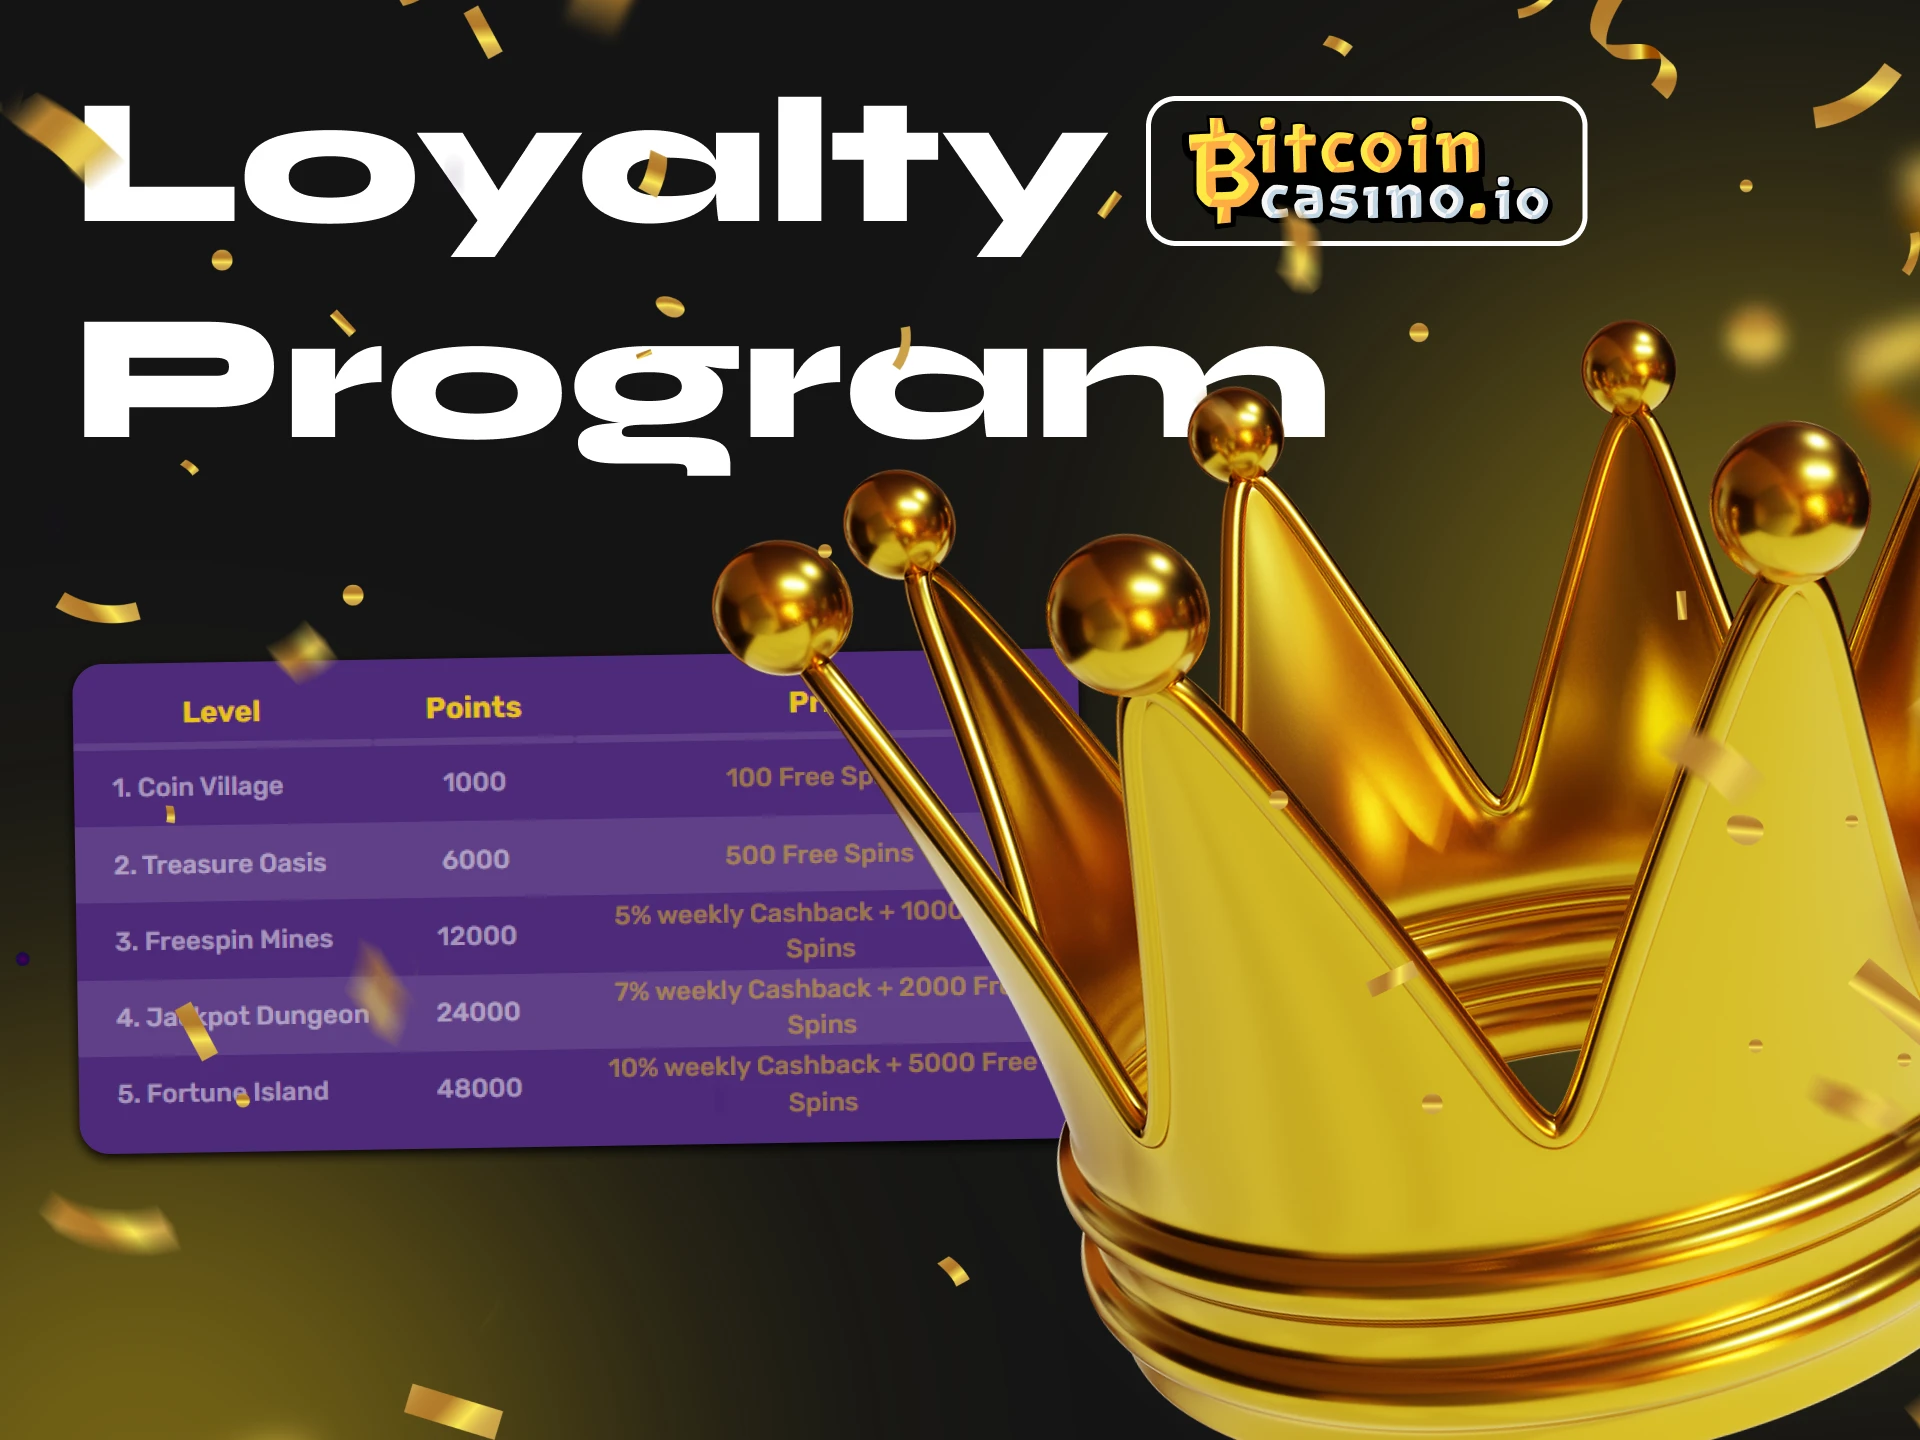 Join the Bitcoincasino loyalty program and receive bonuses for leveling up.